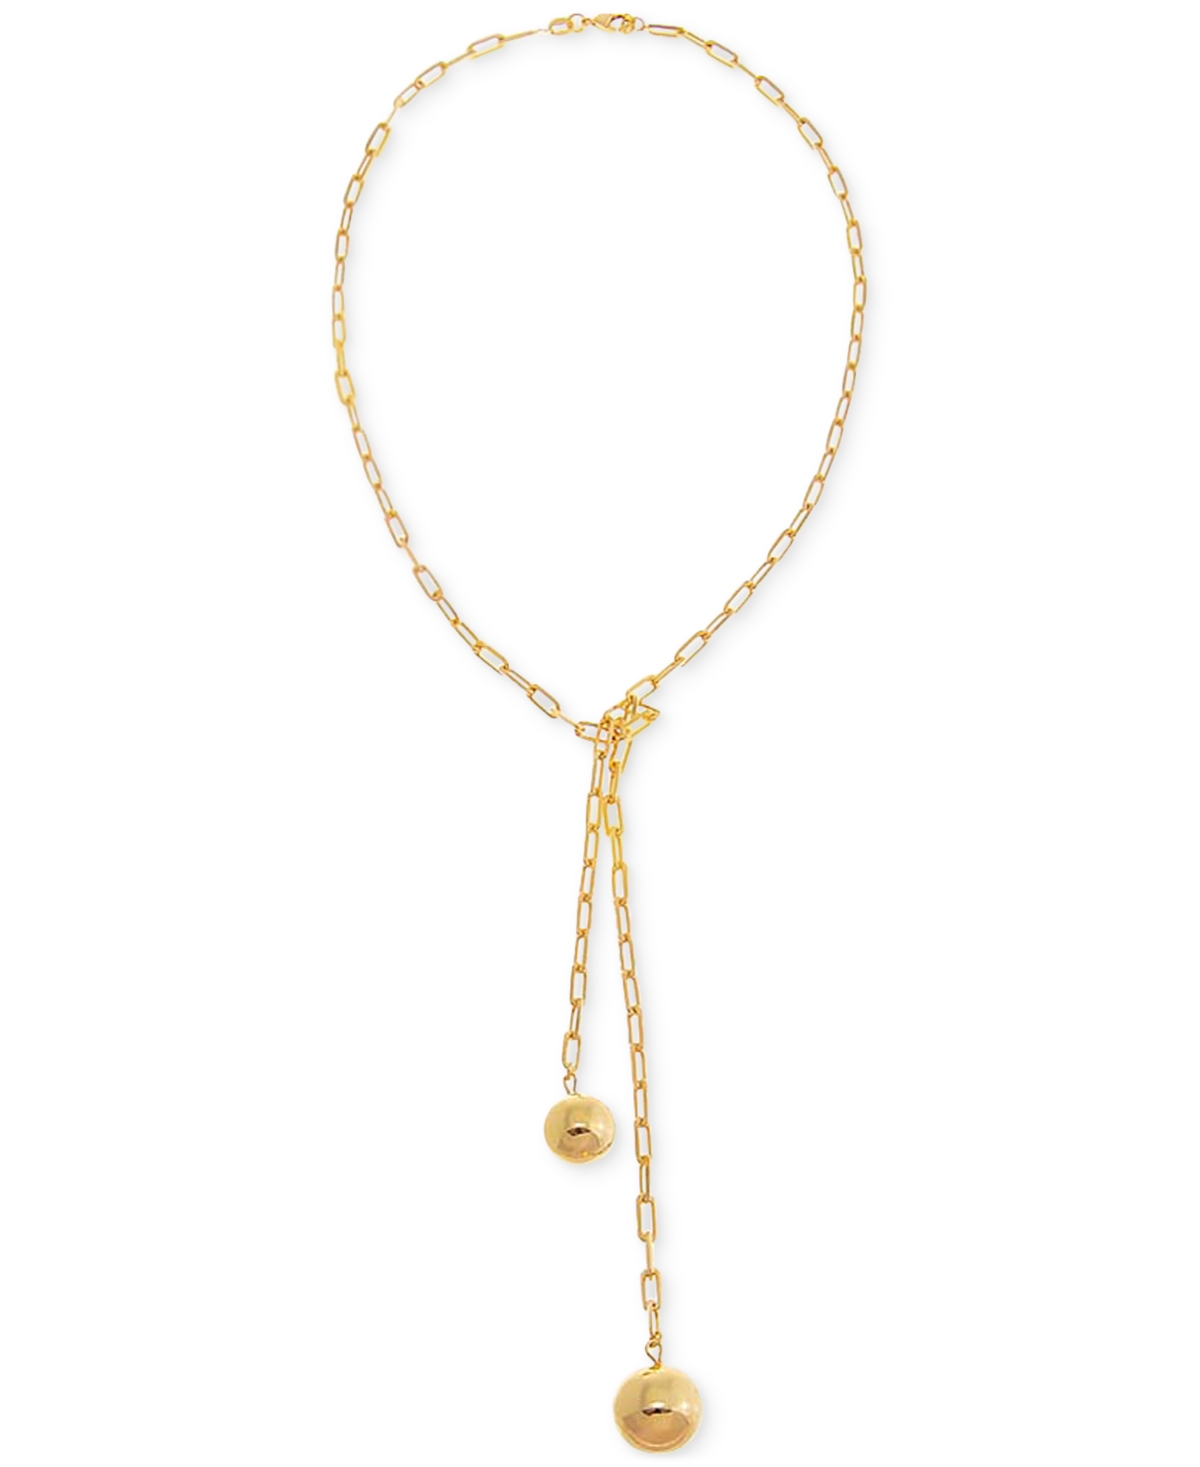 By Adina Eden 14k Gold-plated Double Ball Paperclip Chain 18" Lariat Necklace